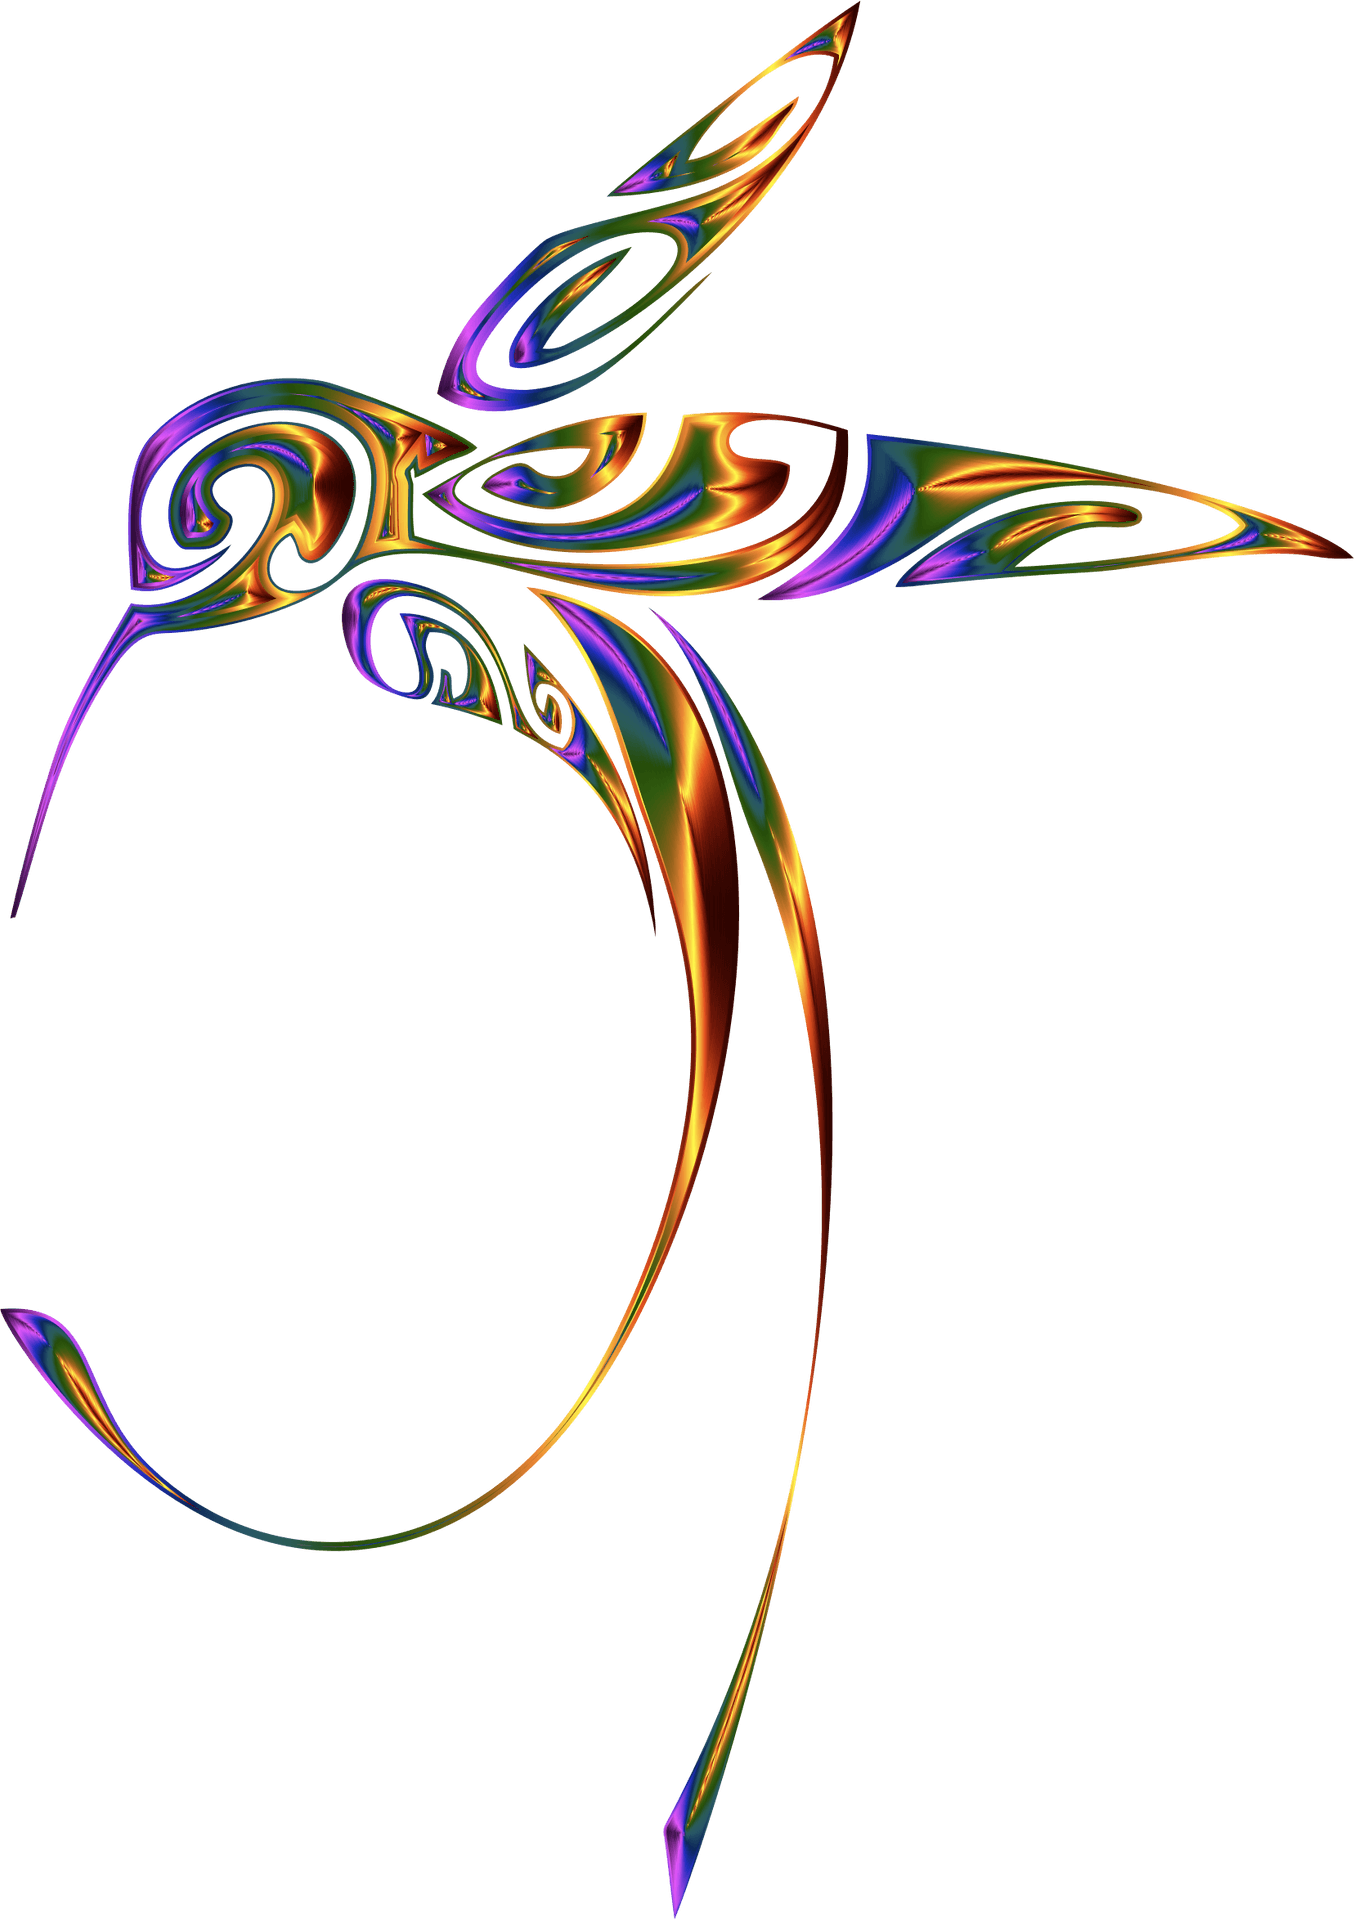 Abstract Psychedelic Swirl Art PNG image